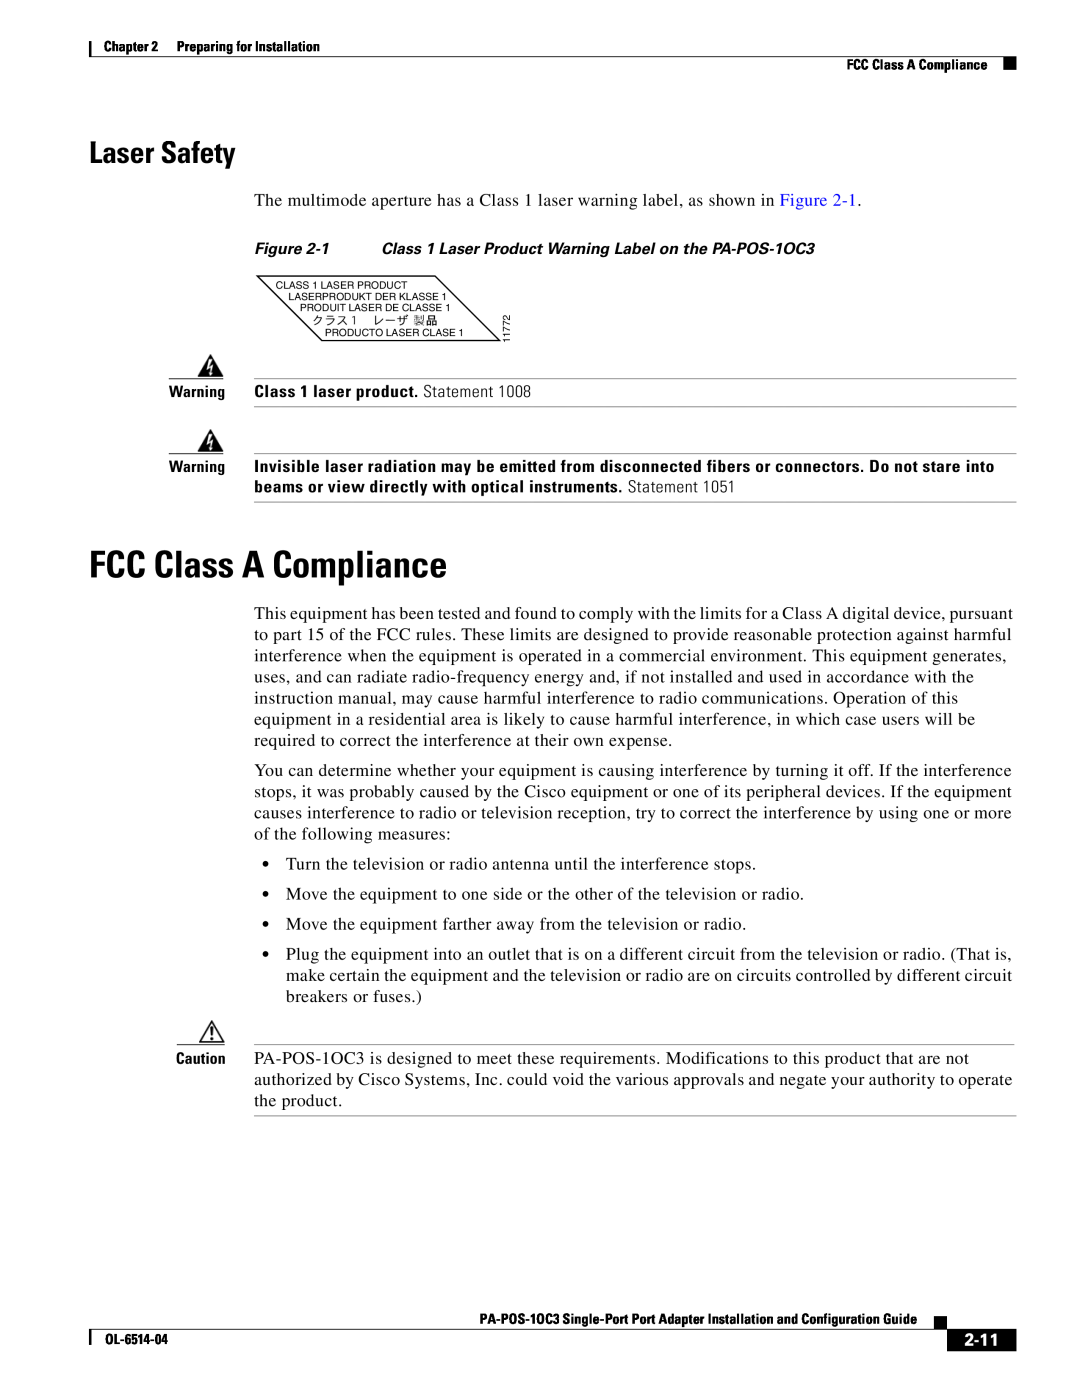 Cisco Systems PA-POS-1OC3 manual FCC Class A Compliance, Laser Safety, Warning Class 1 laser product. Statement, 2-11 